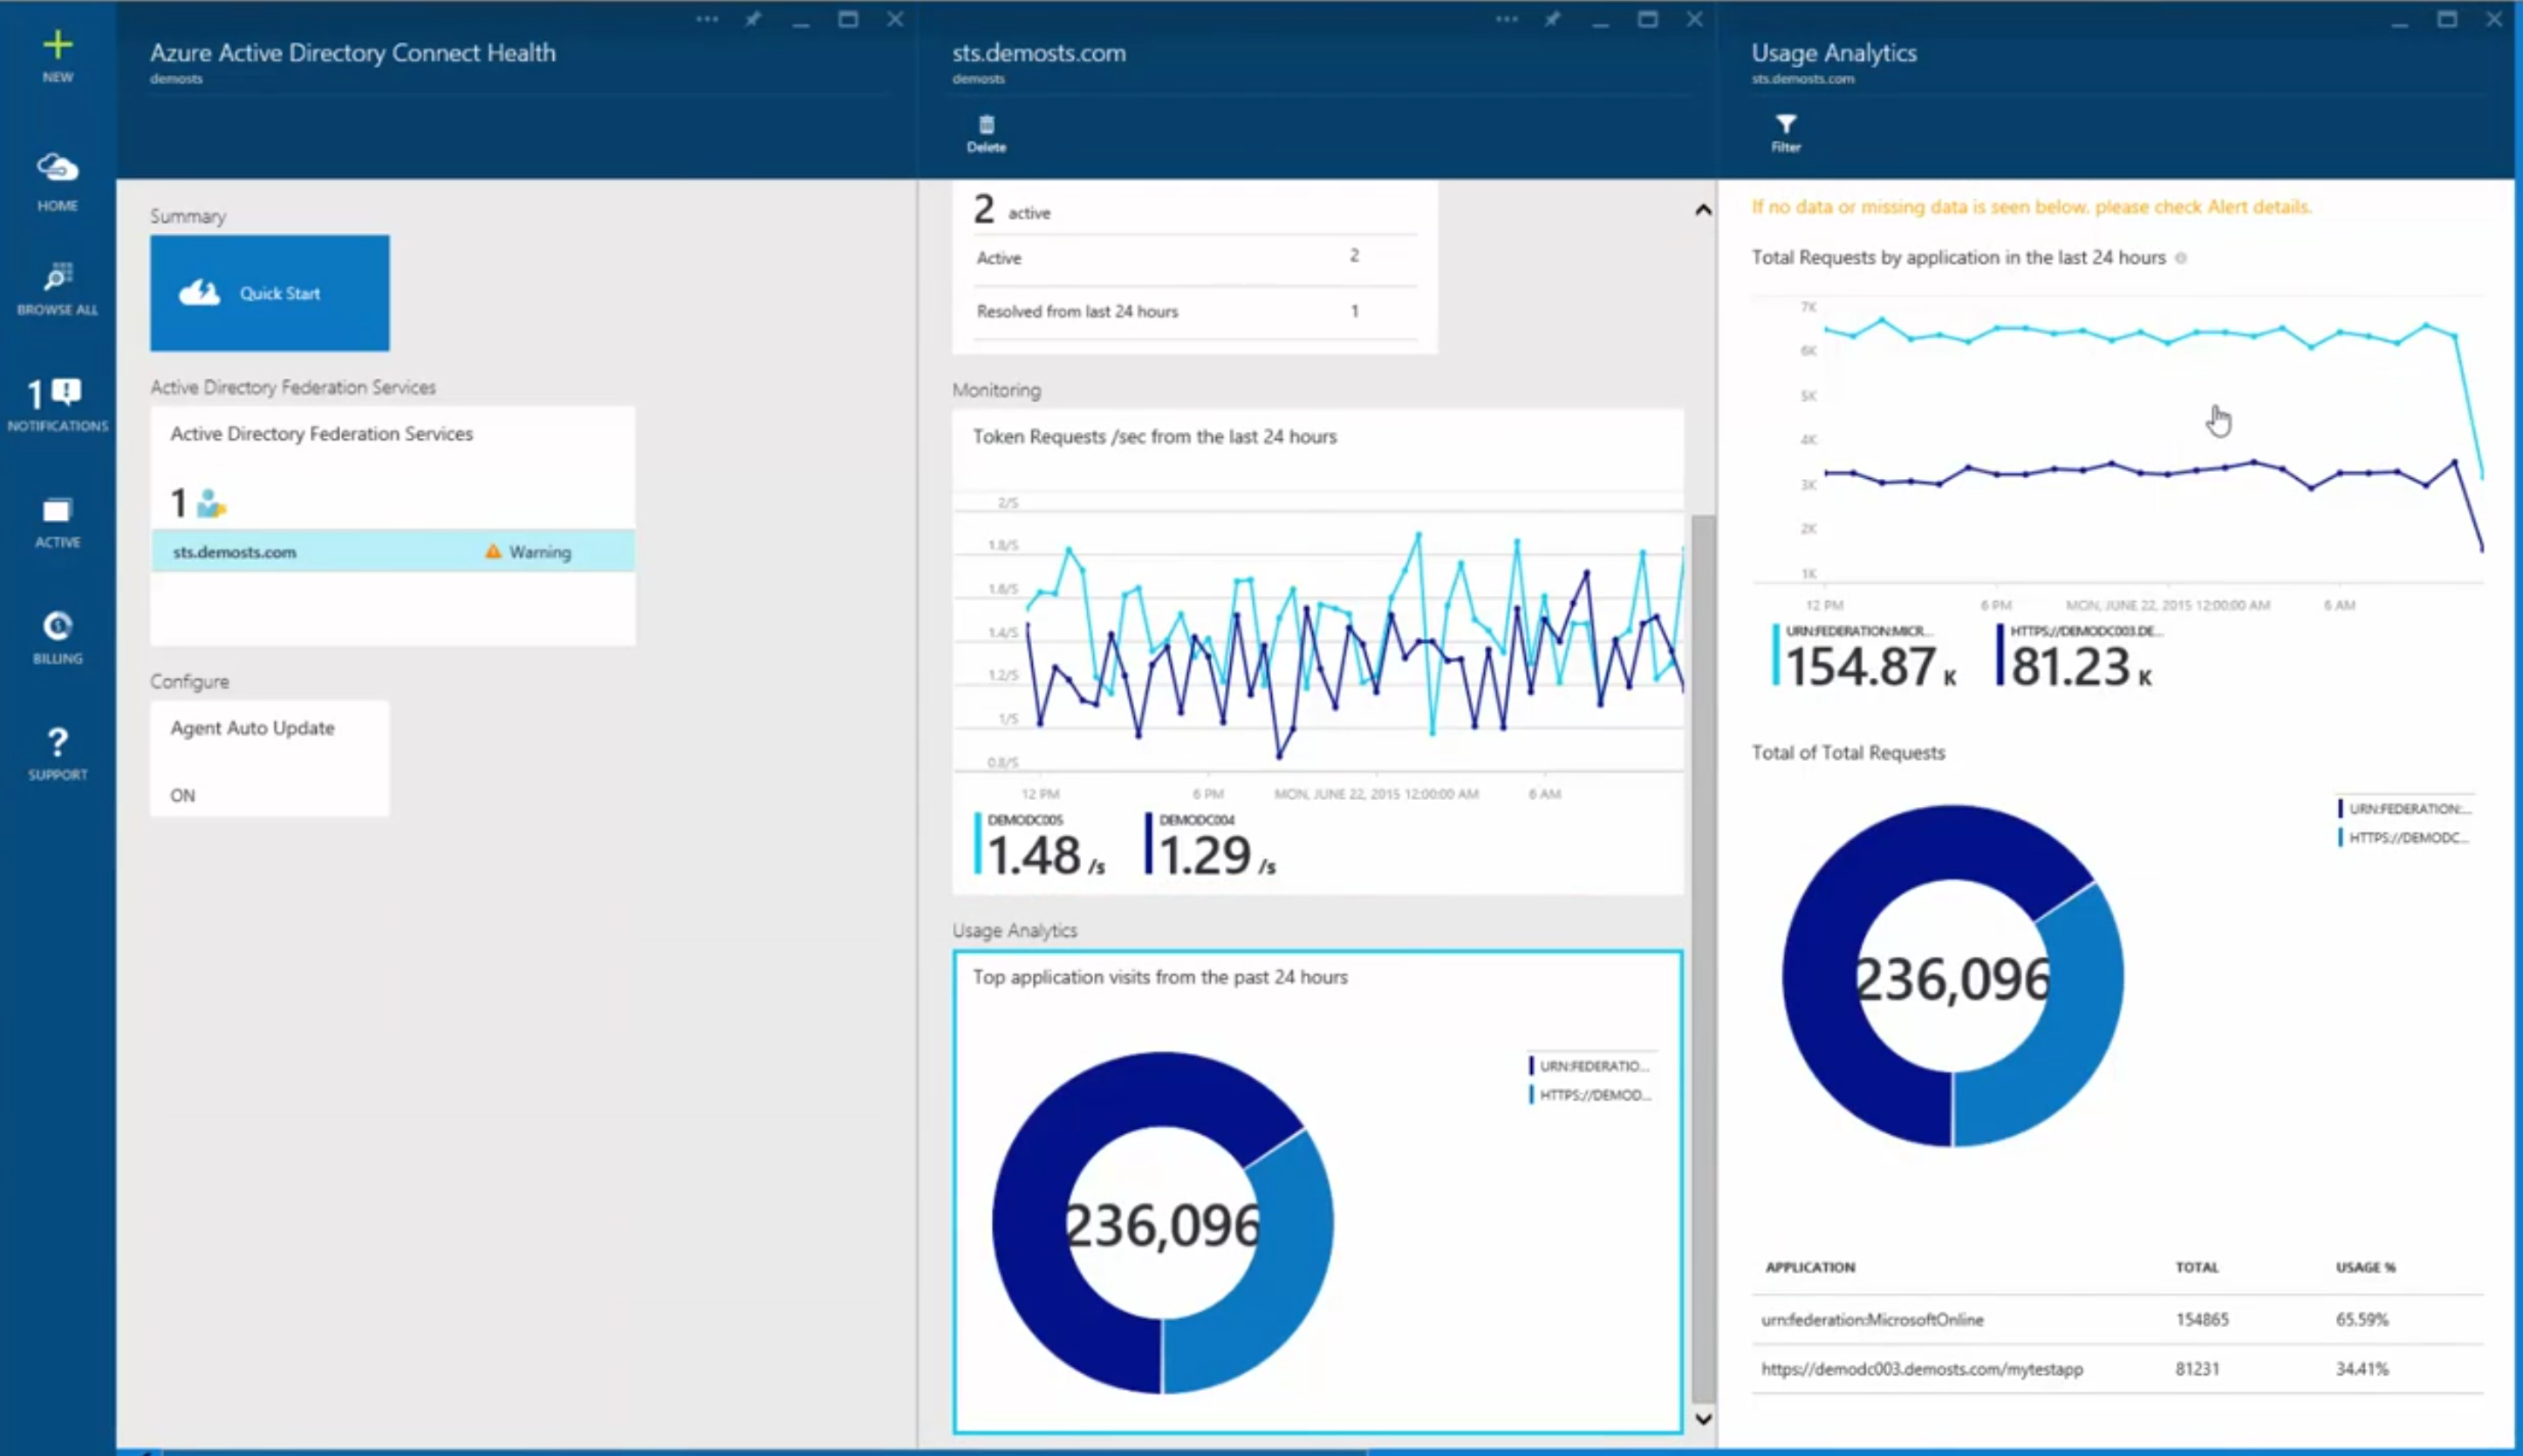 Azure AD Connect Health for ADFS [Image Credit: Microsoft]